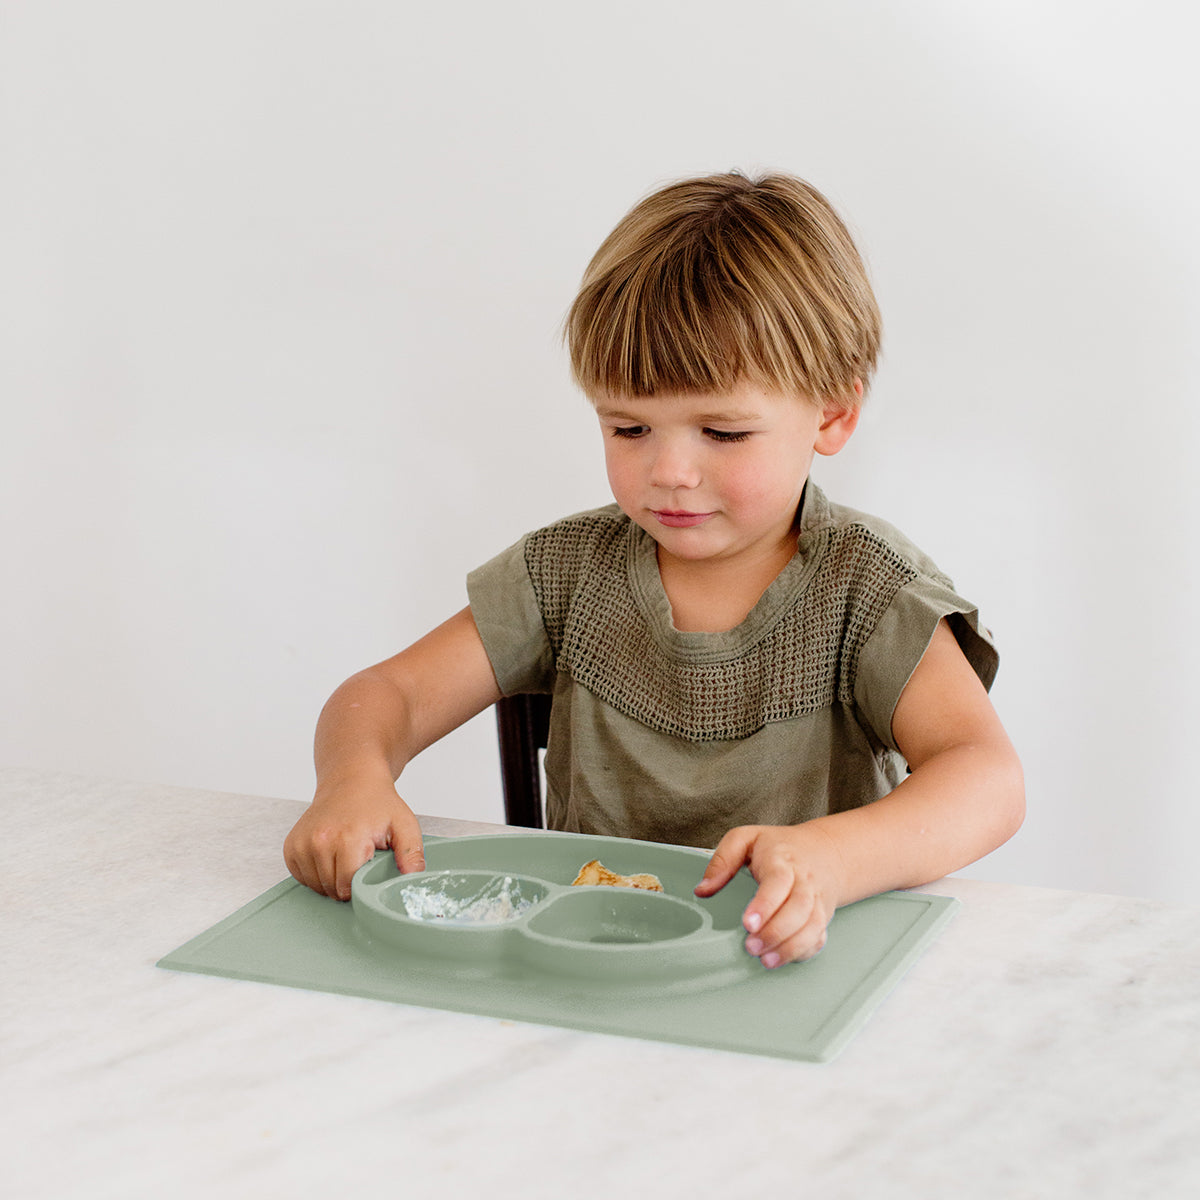 Happy Mat in Sage by ezpz / The Original All-In-One Silicone Plates & Placemats that Stick to the Table